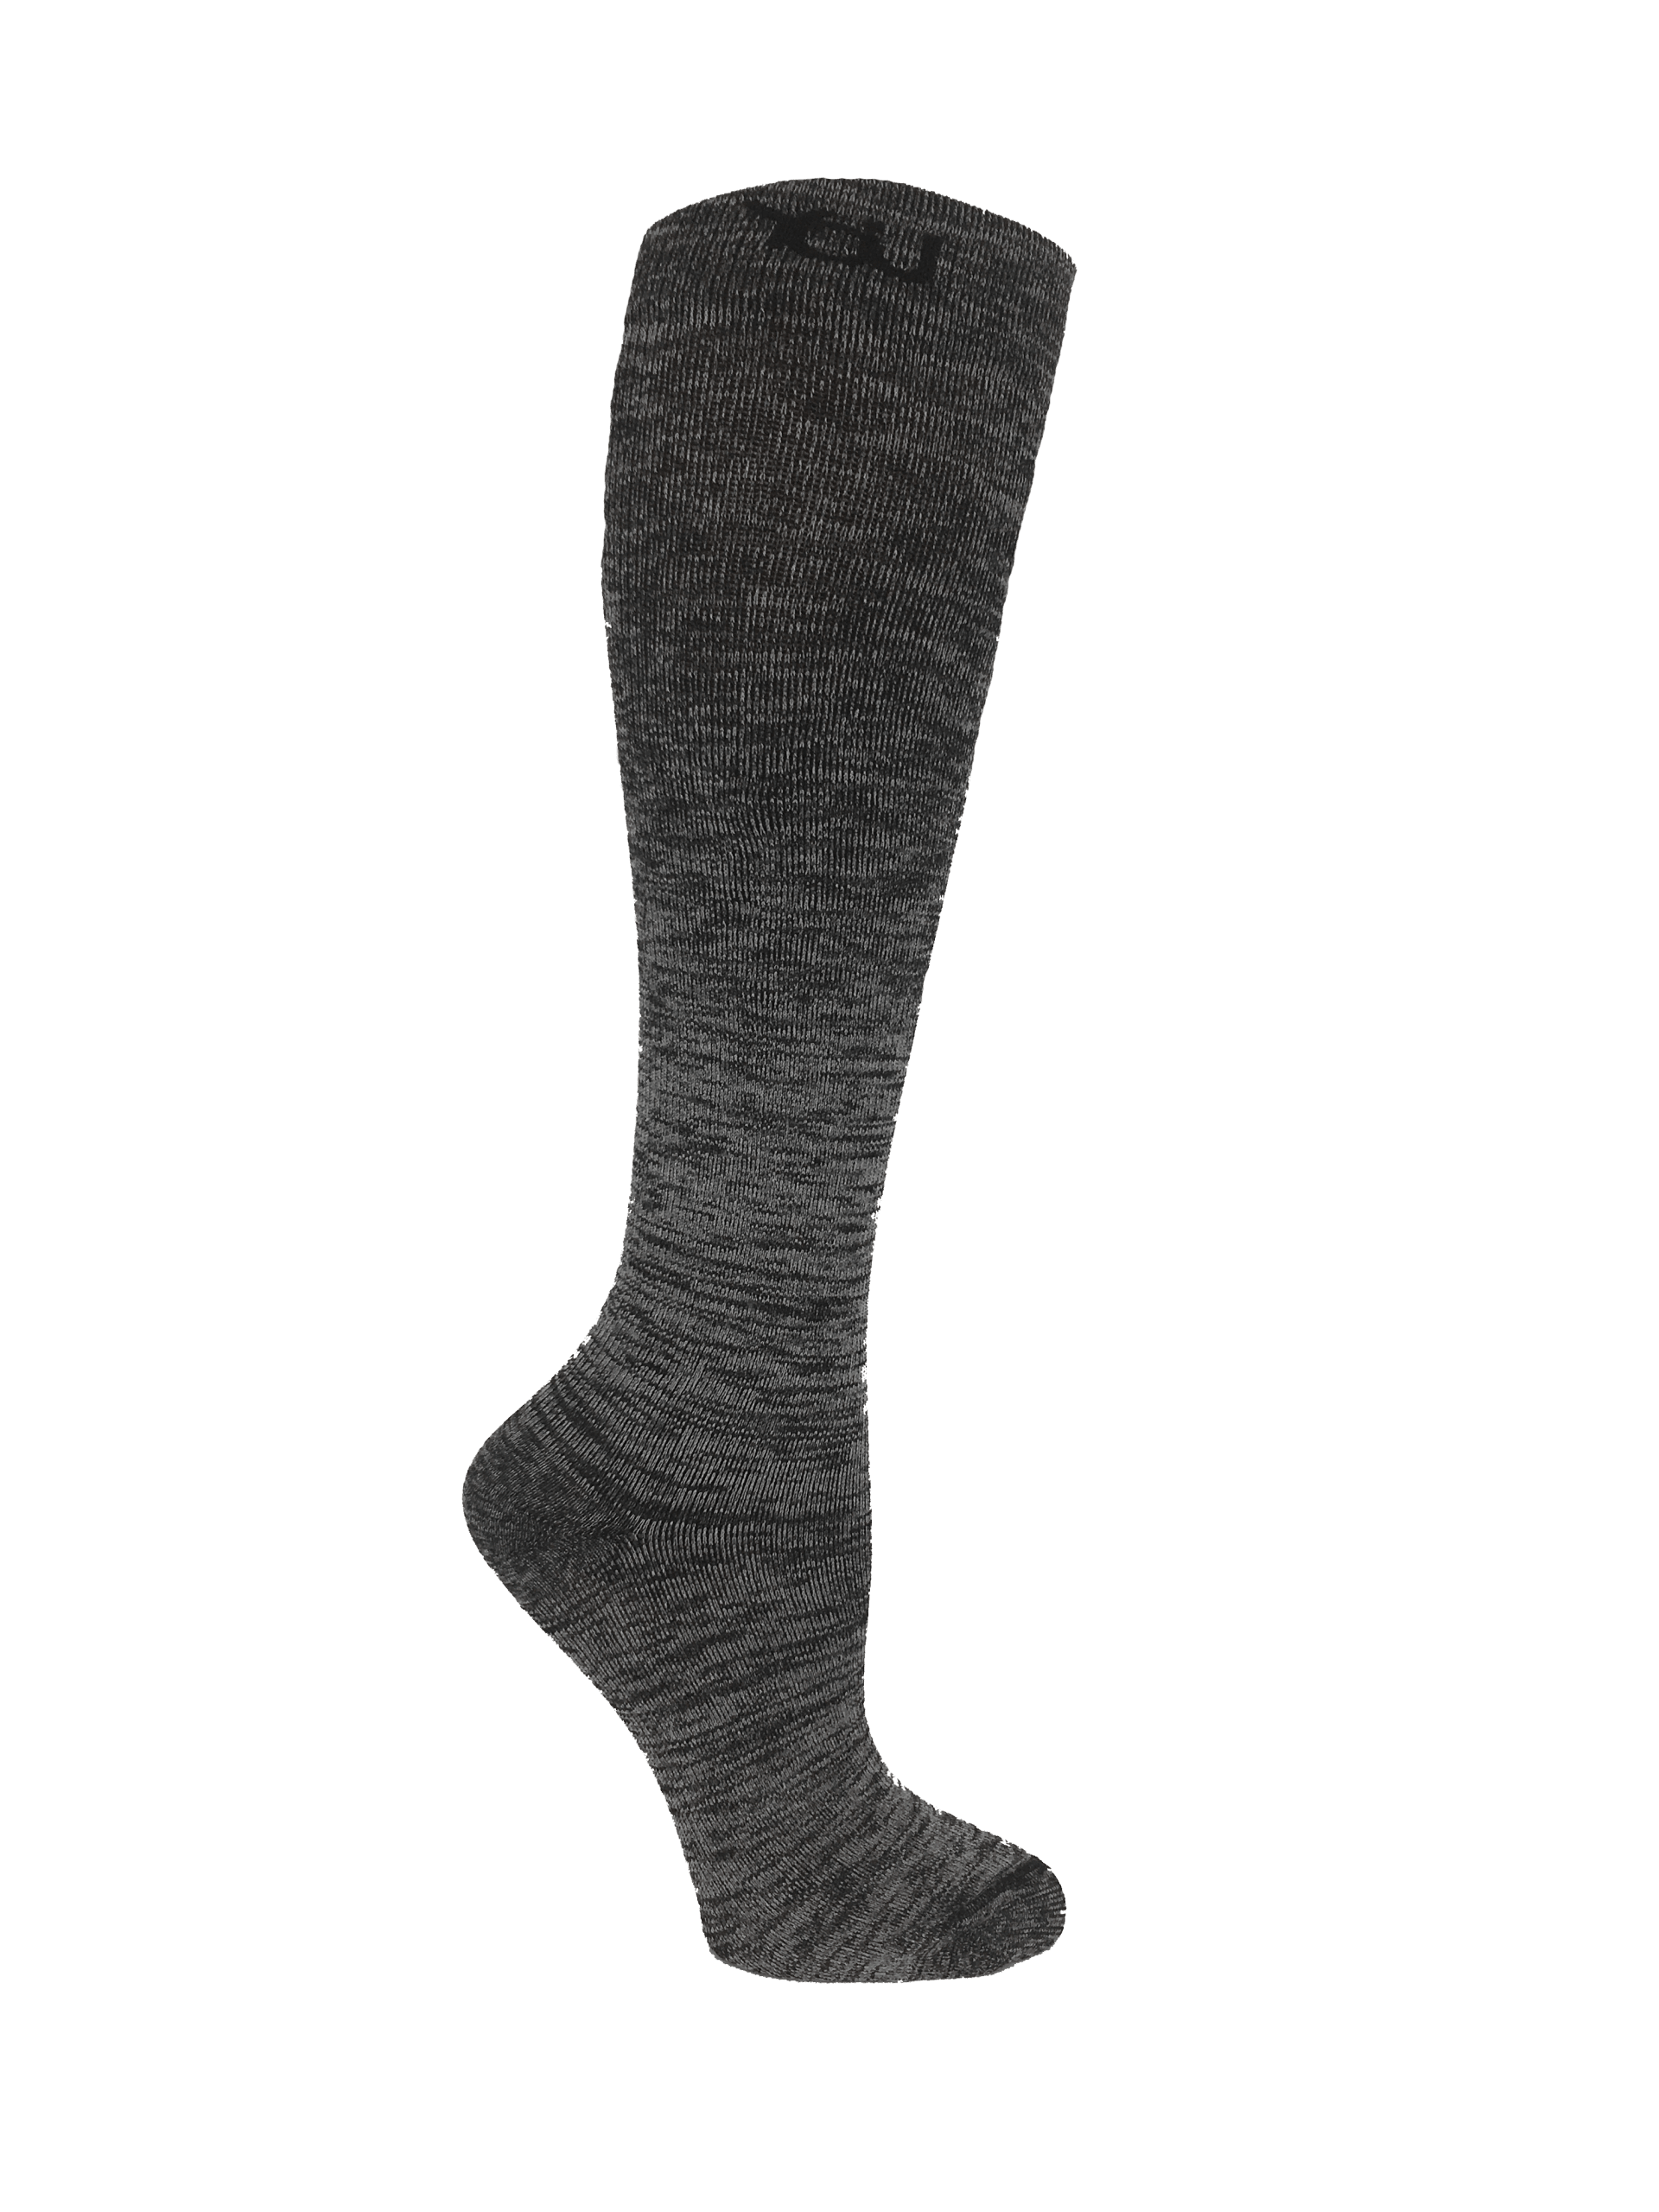 Compression Socks – Supply Cold Therapy